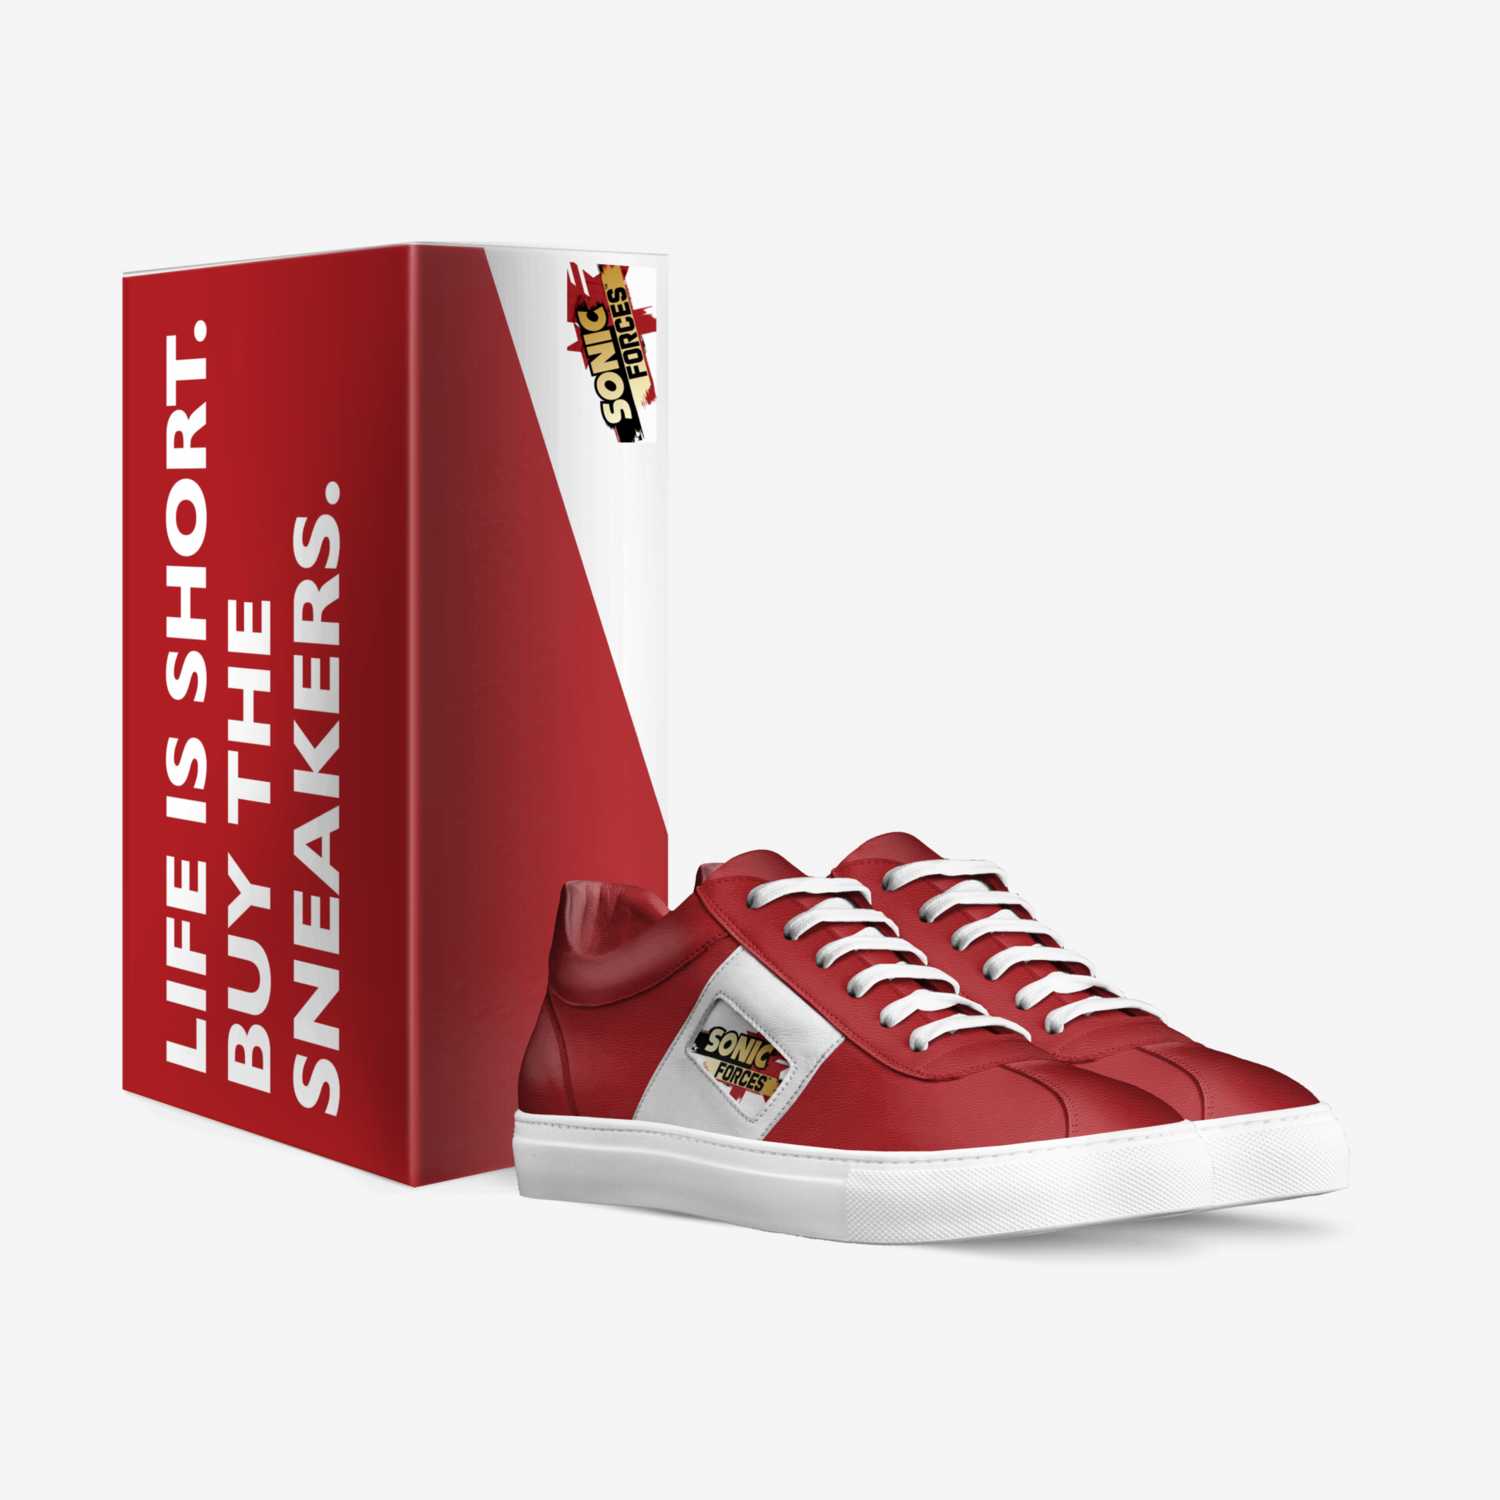 Sonic forces custom made in Italy shoes by Noah Murray | Box view